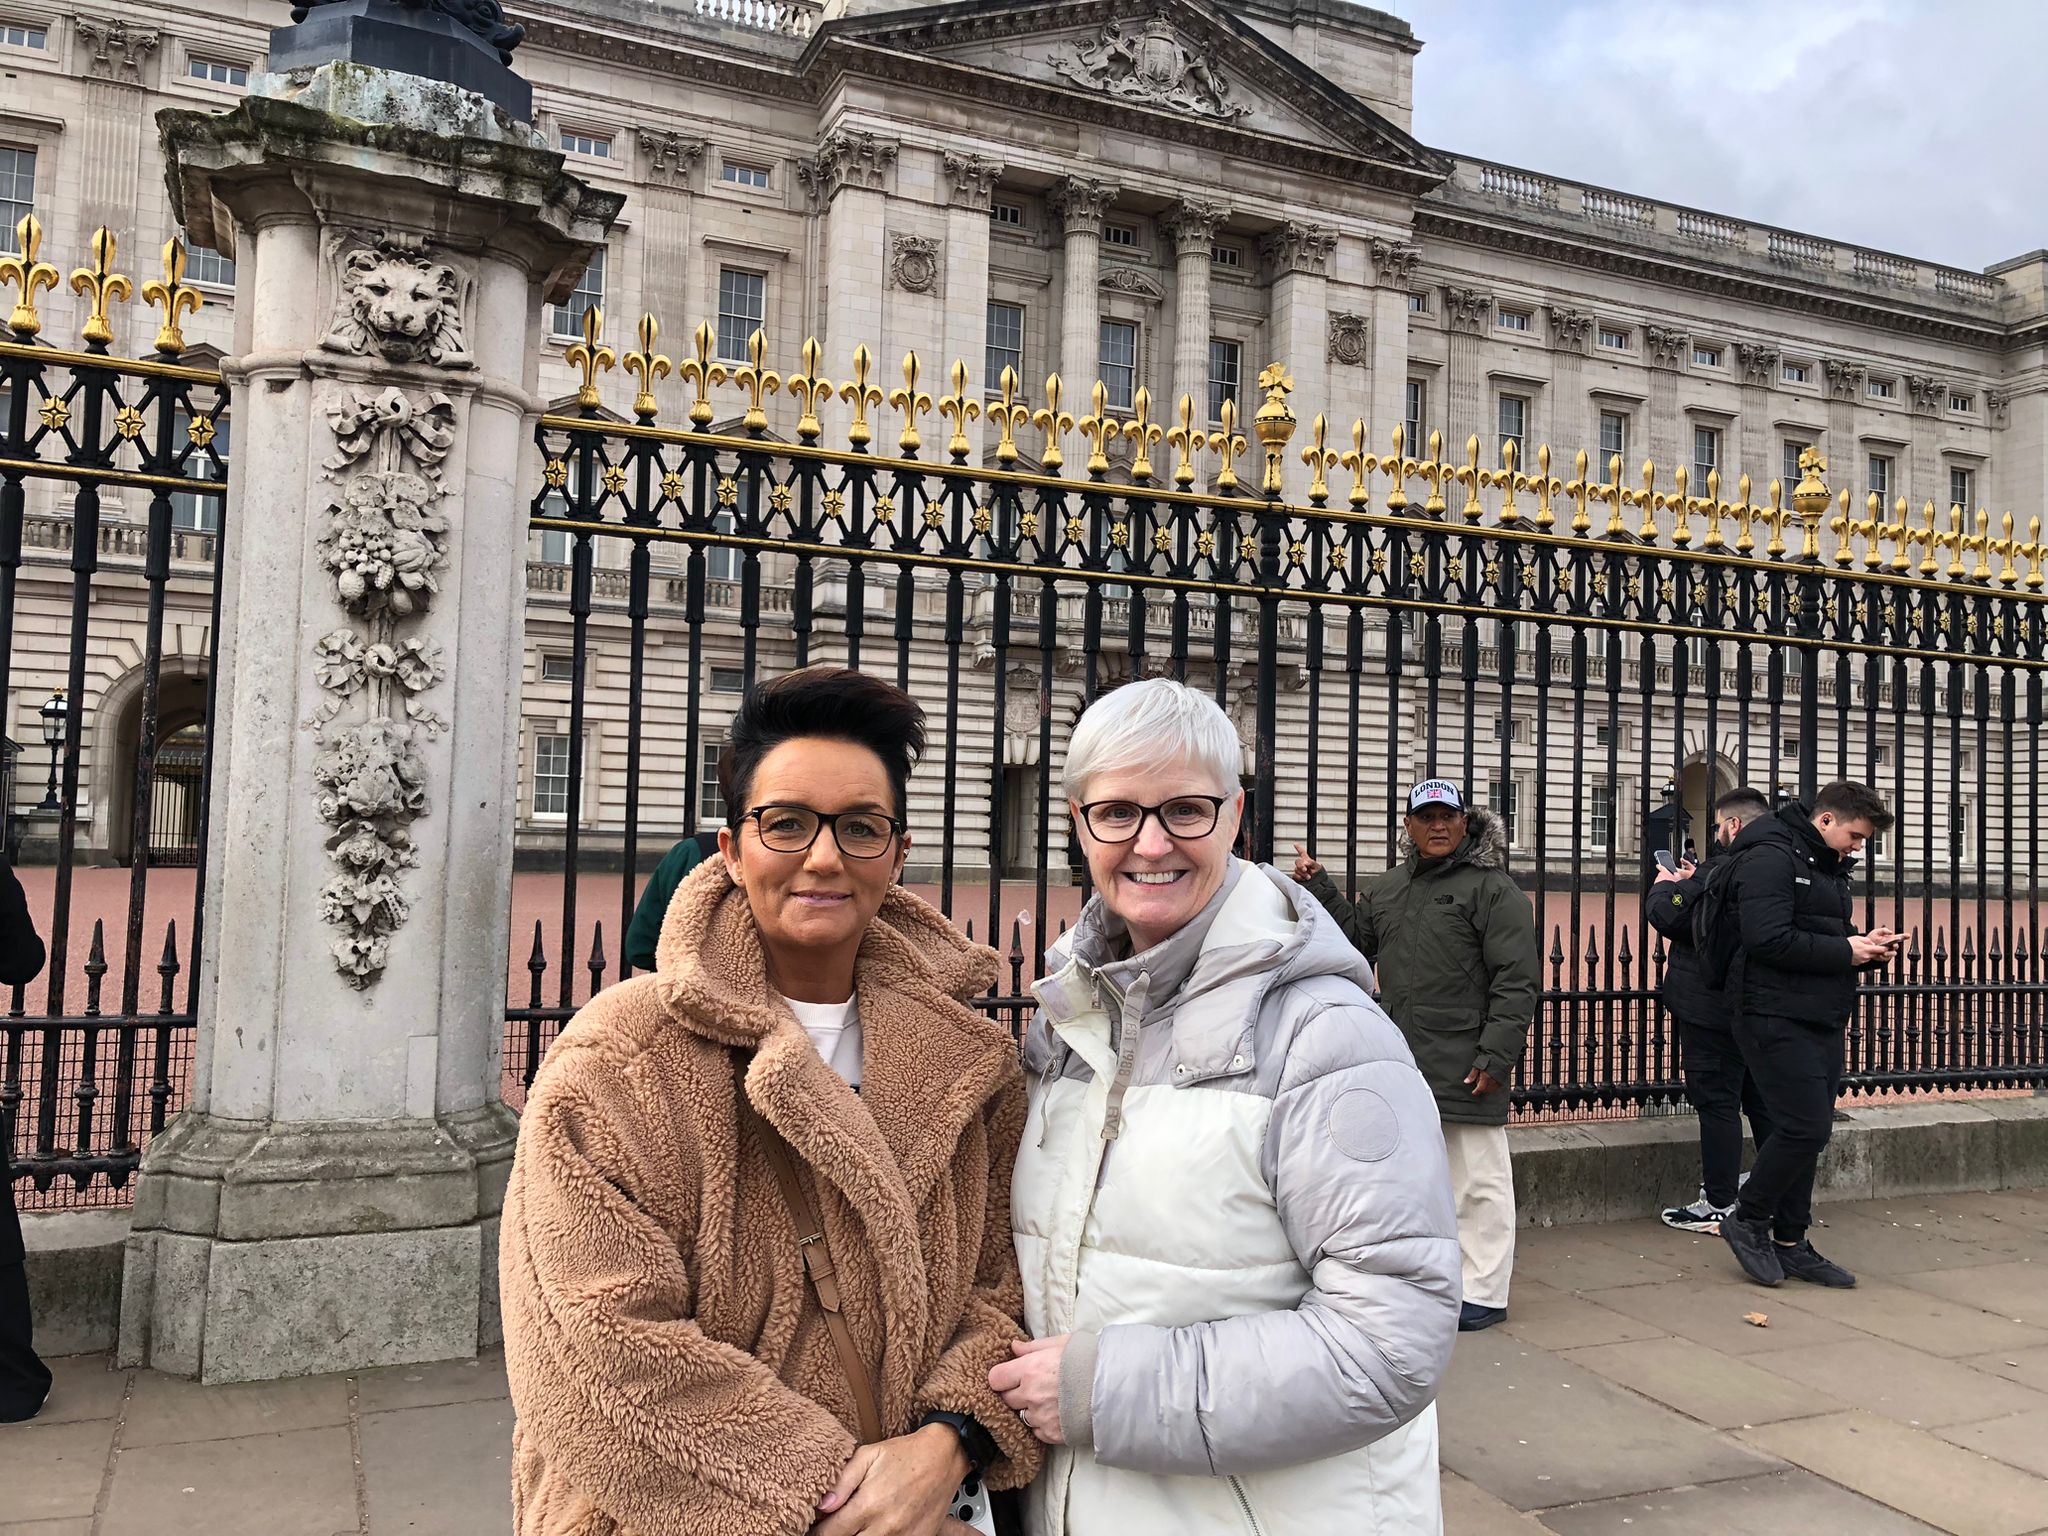 Julie, 49, and Arlene, 54, booked flights to London upon hearing the news of the King’s diagnosis